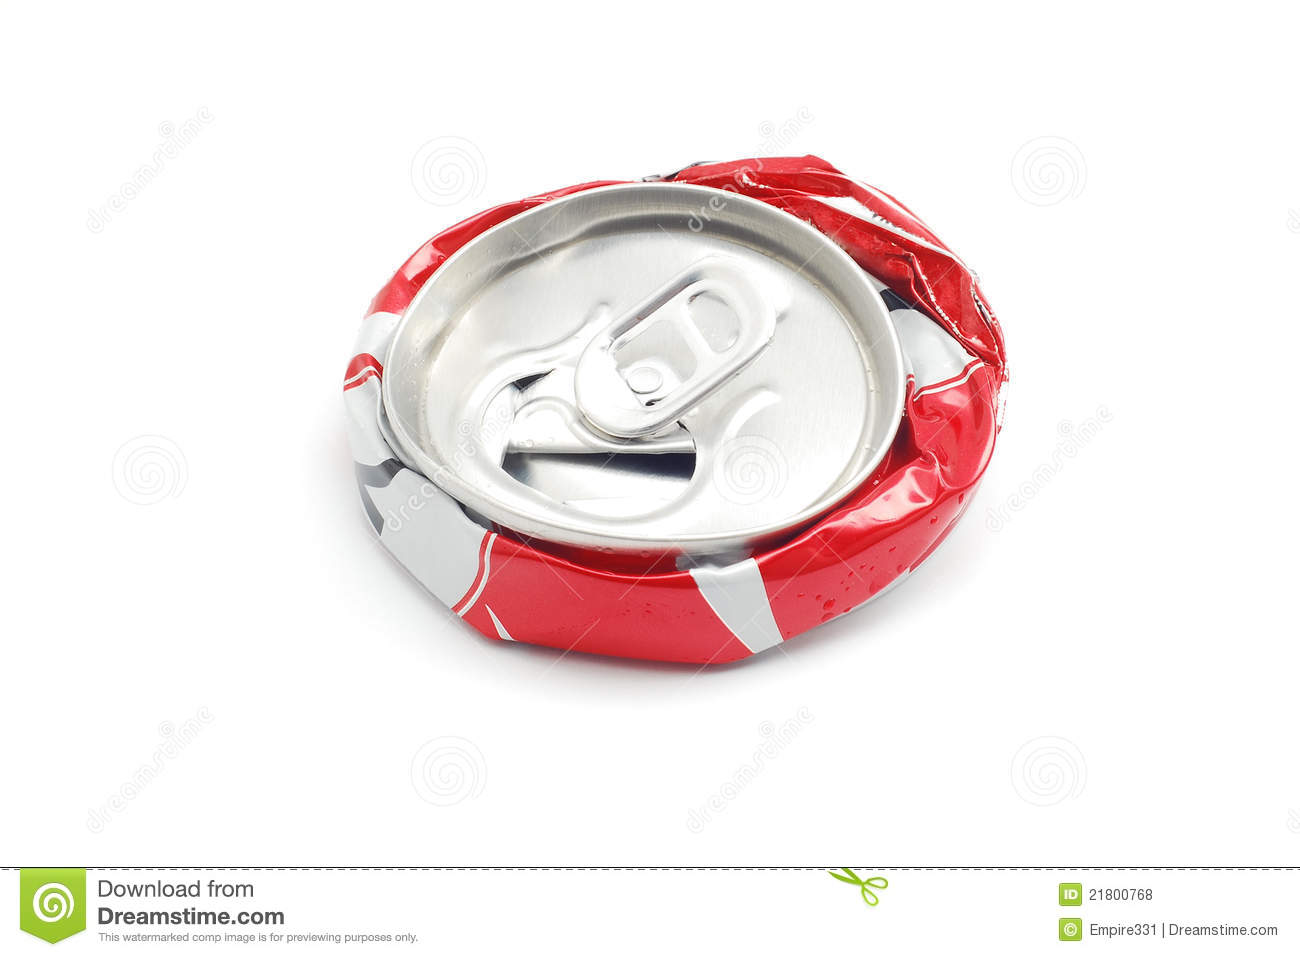 Crushed Soda Can Royalty Free Stock Photos   Image  21800768